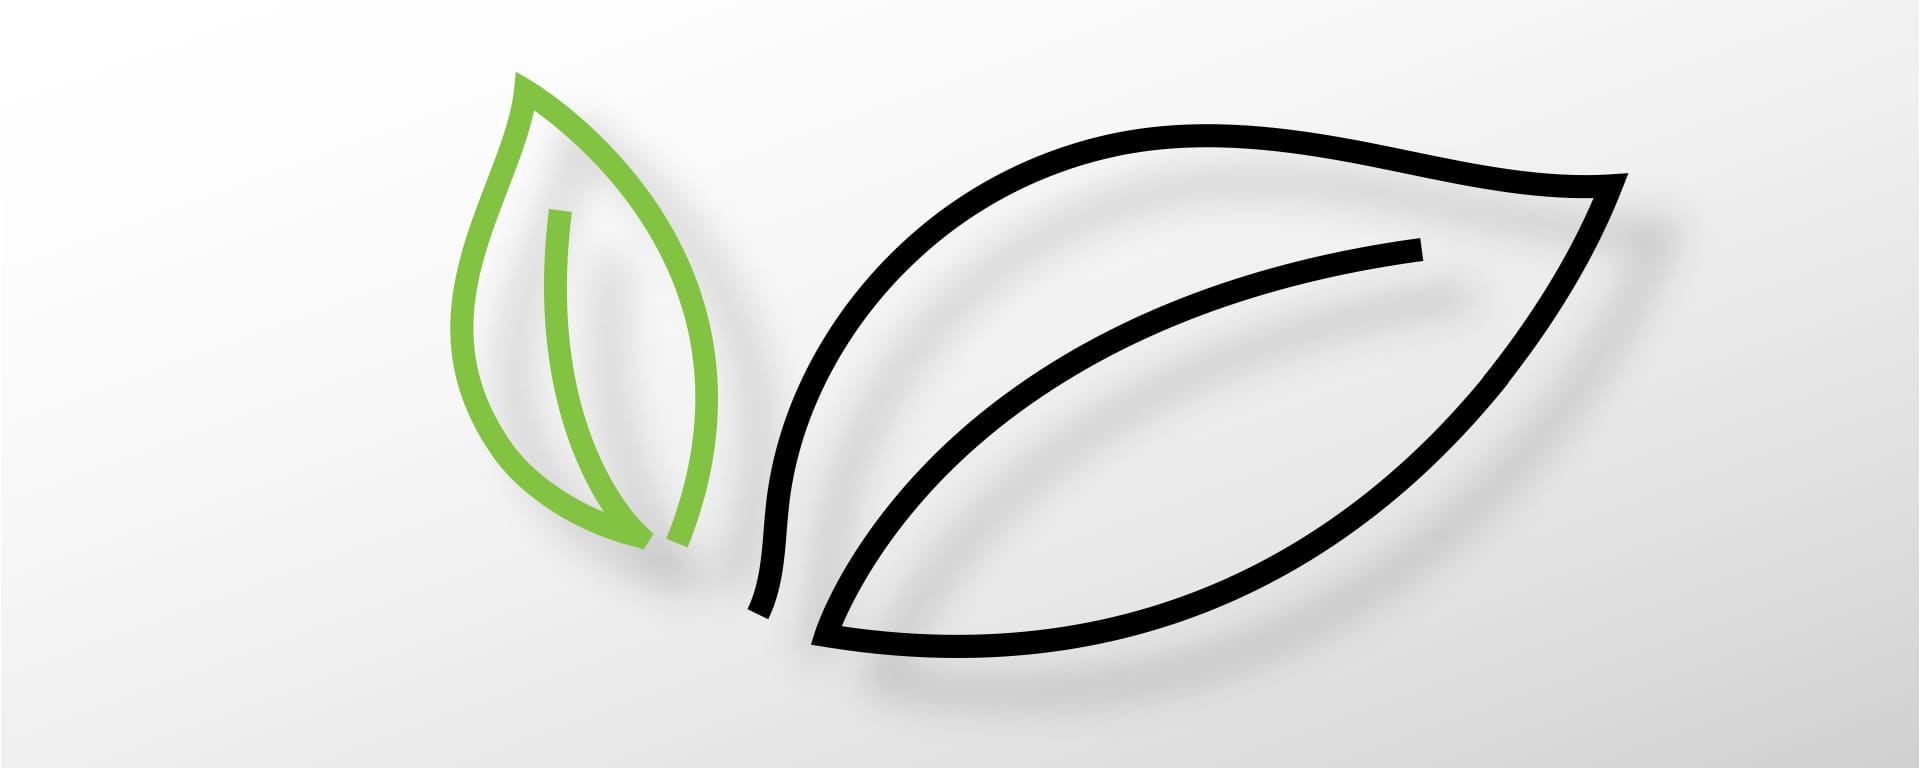 Environment graphic: two line drawings of leaves in green and black against white background with shadows